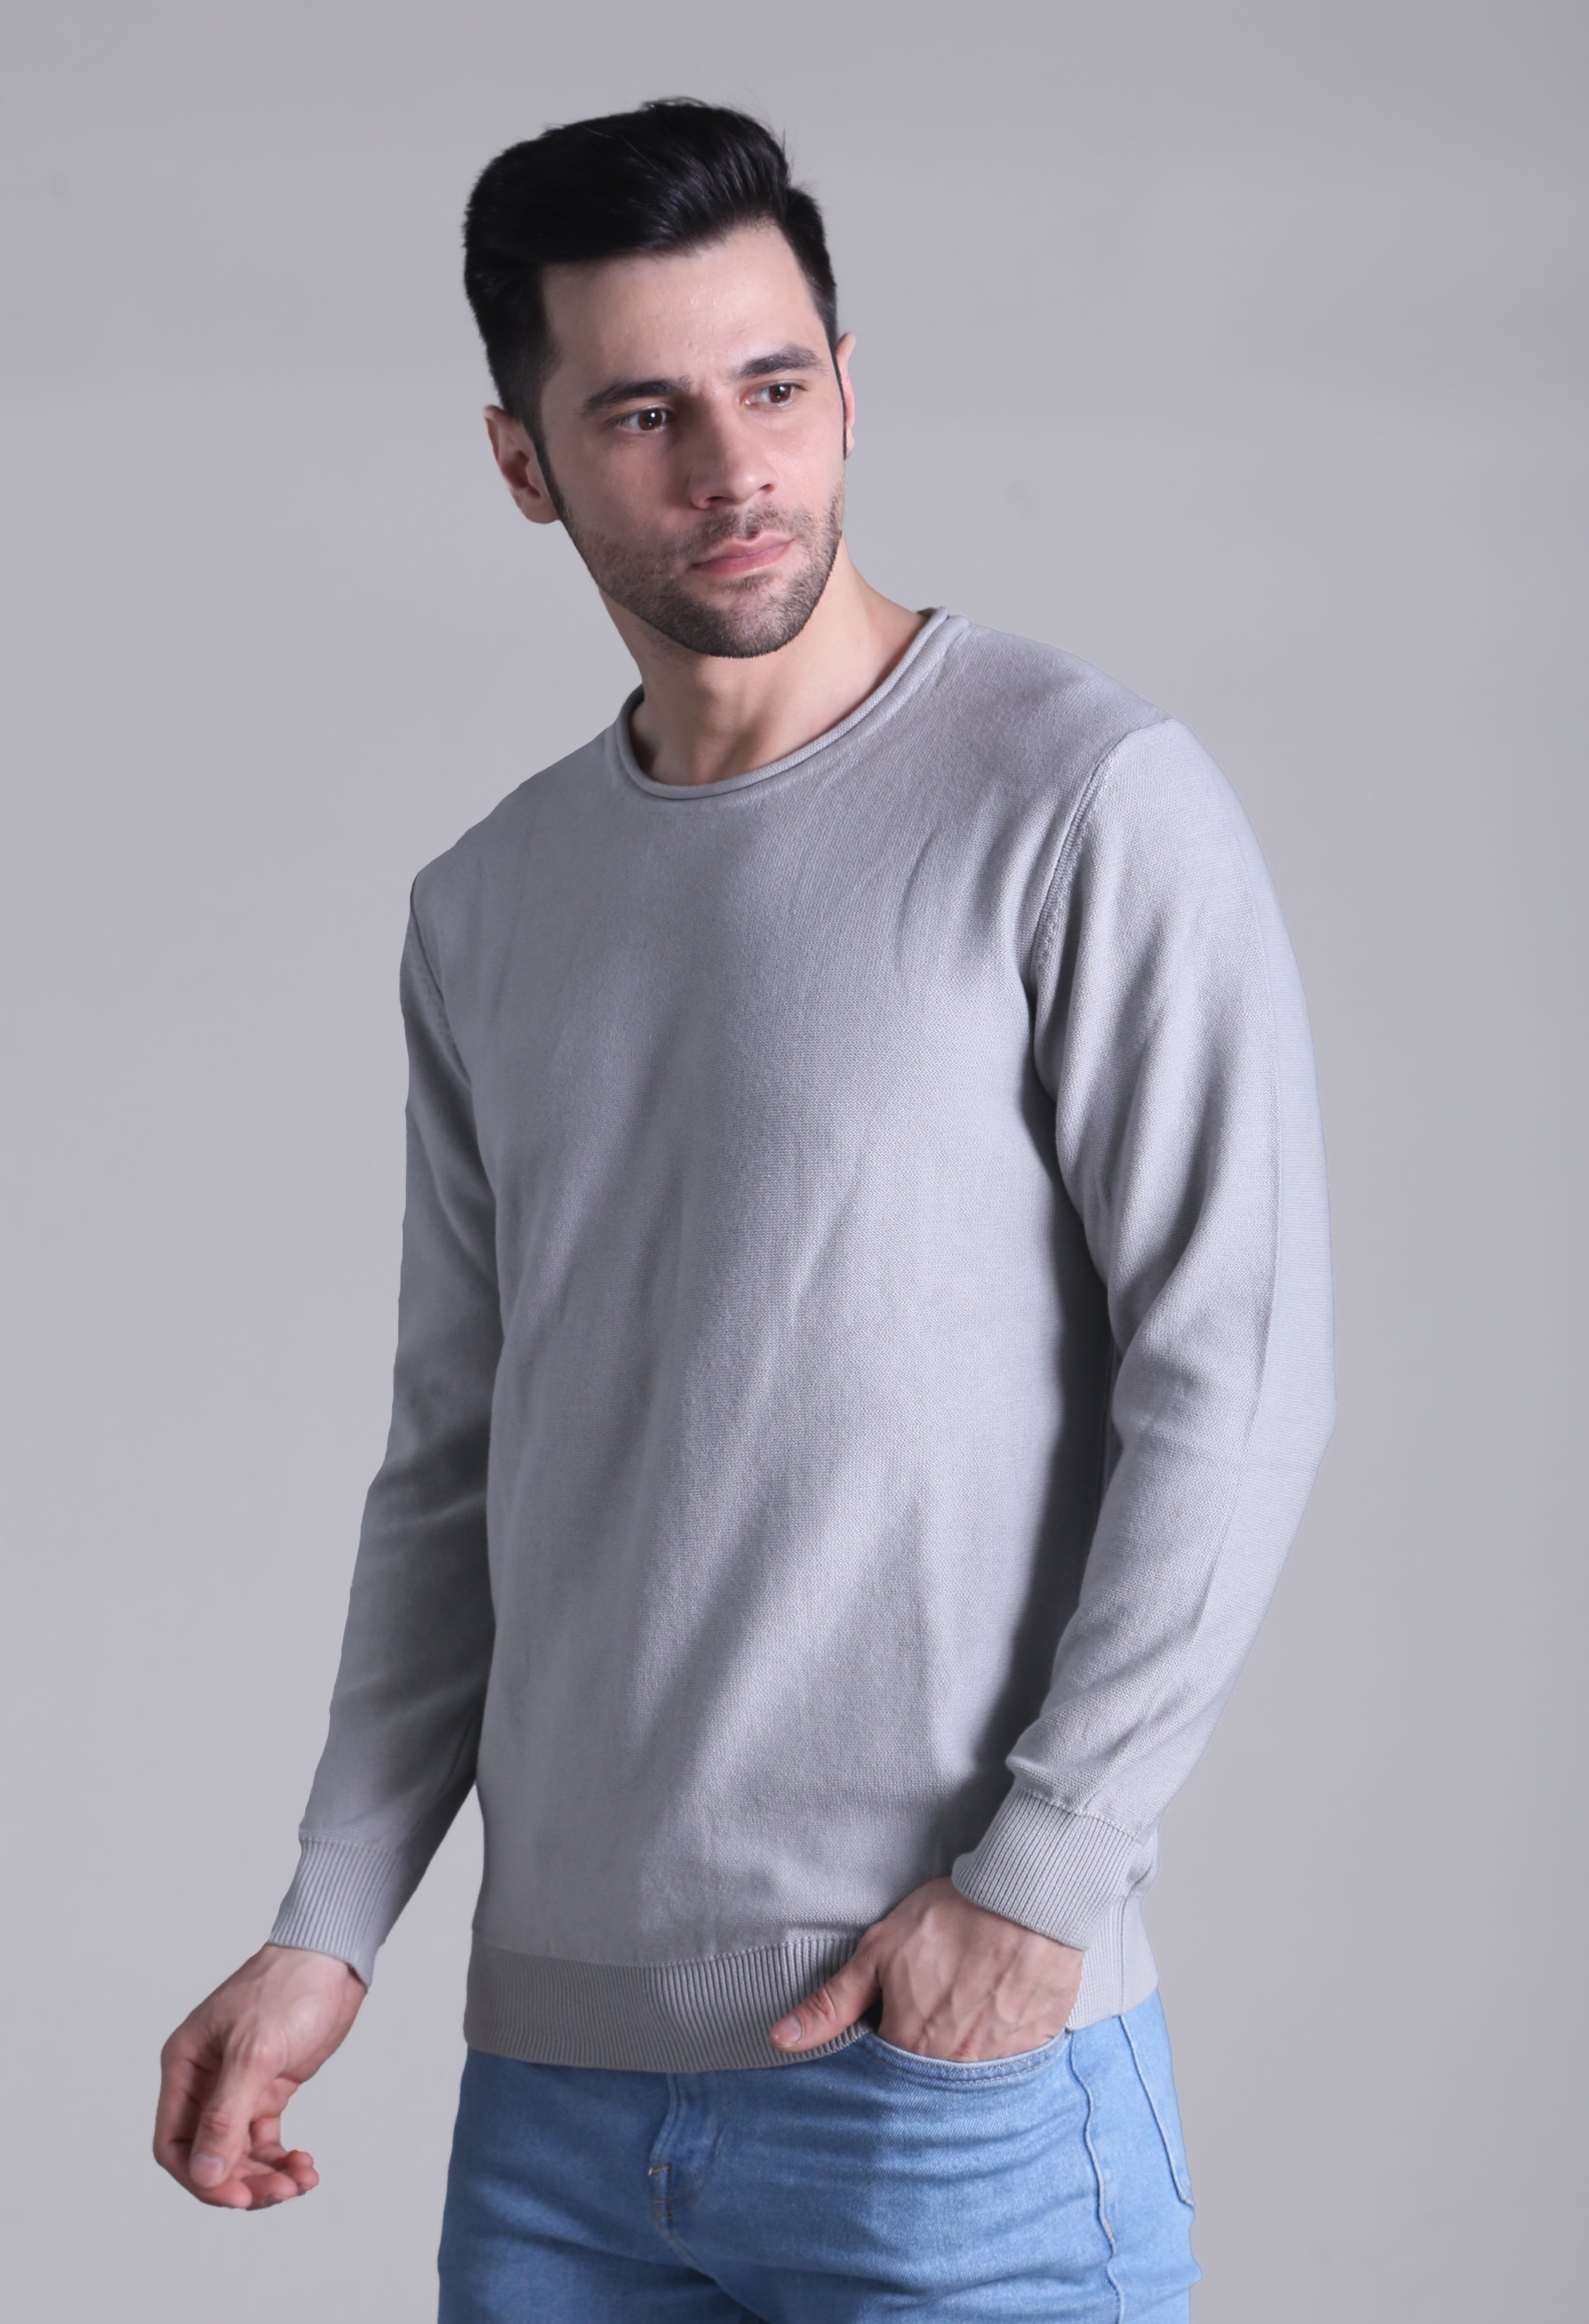 Solid Plane Gray Sweater - SQUIREHOOD